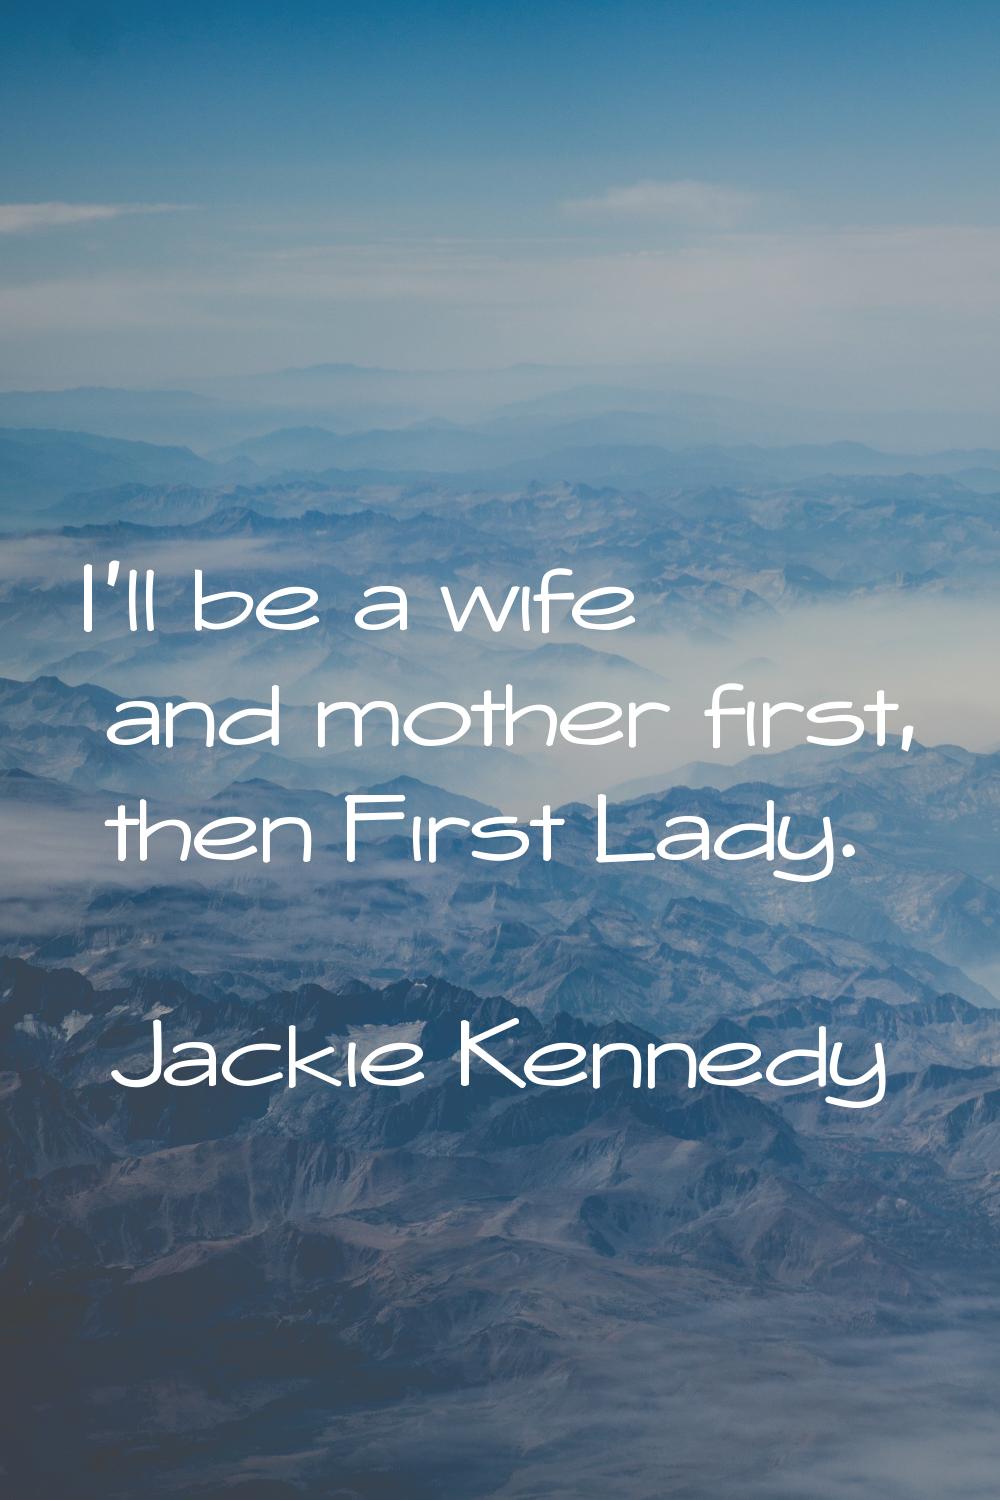 I'll be a wife and mother first, then First Lady.